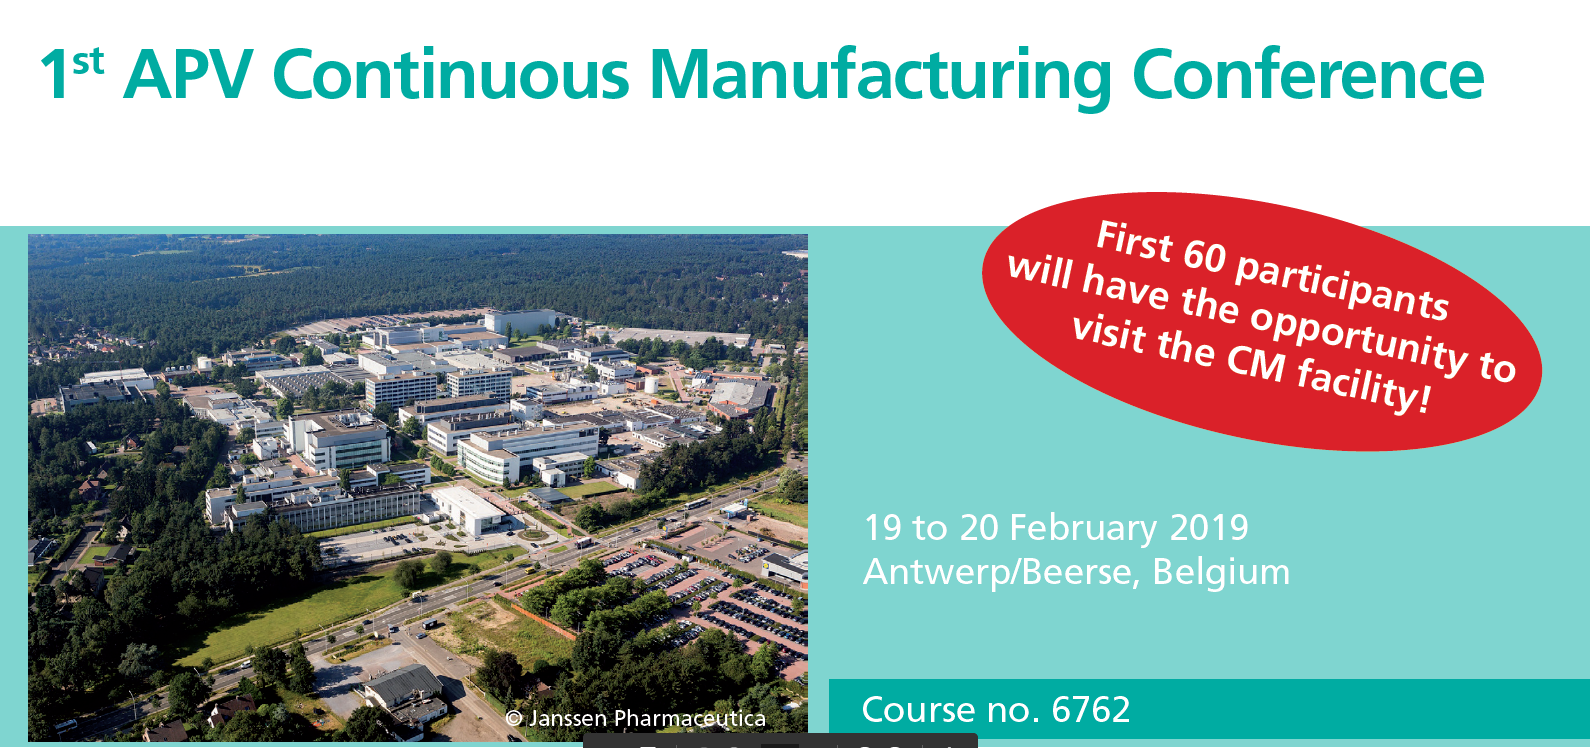 1st APV Continuous Manufacturing Conference Pharma Excipients